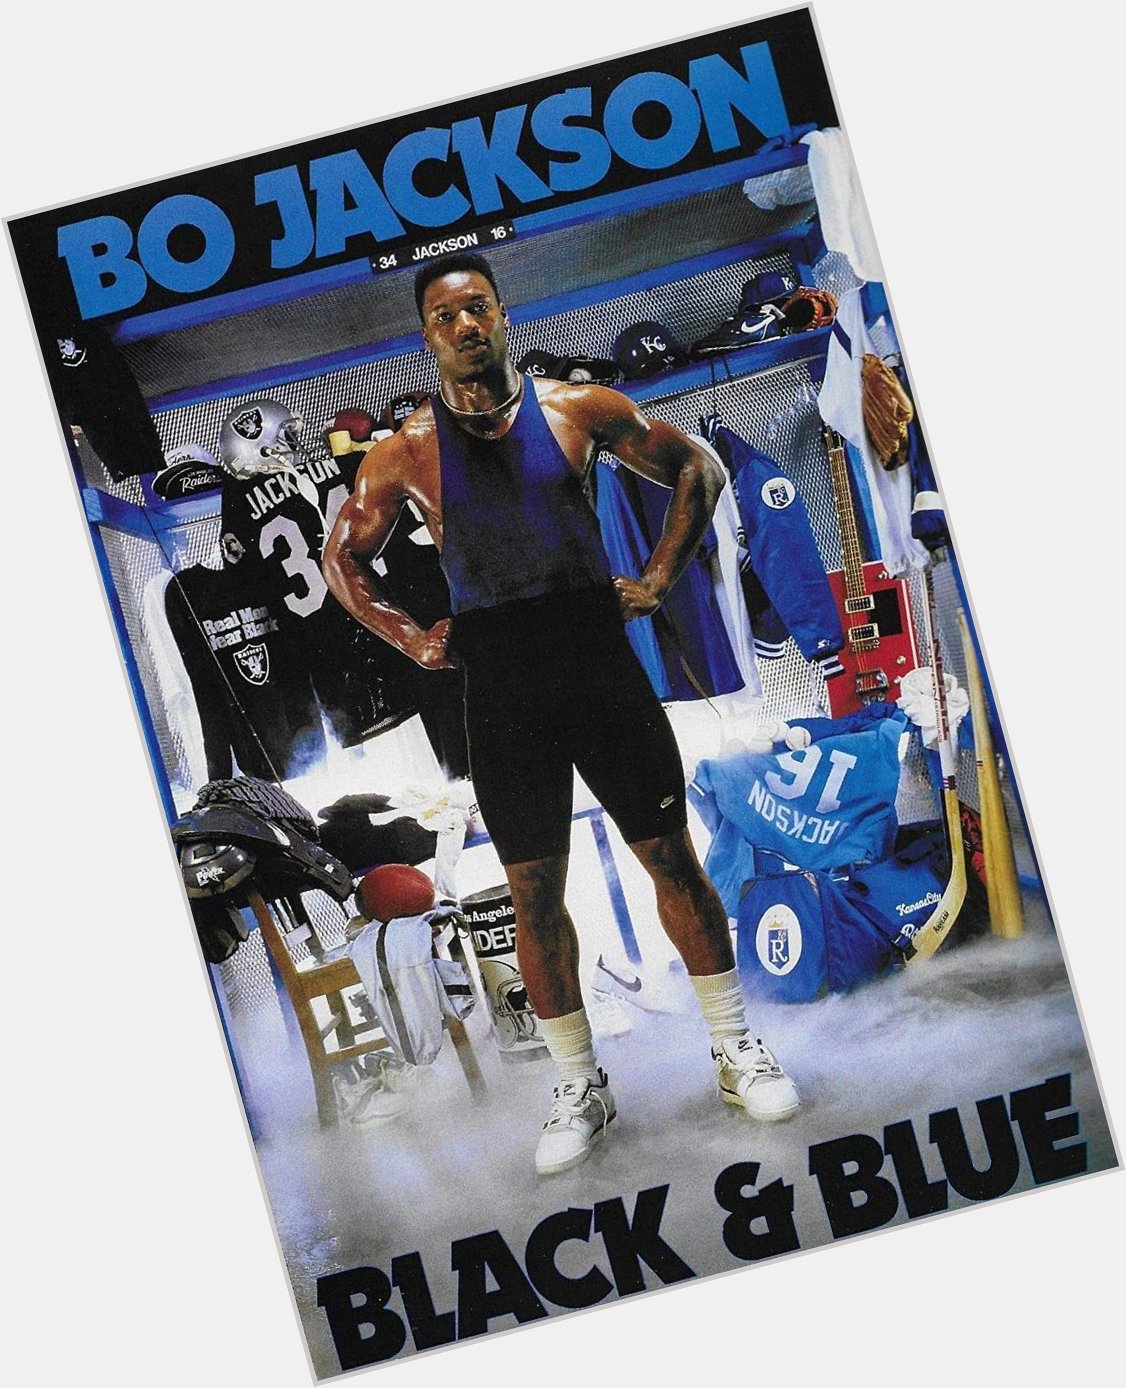 Happy birthday, Bo Jackson. Had this poster on my wall as a kid. 